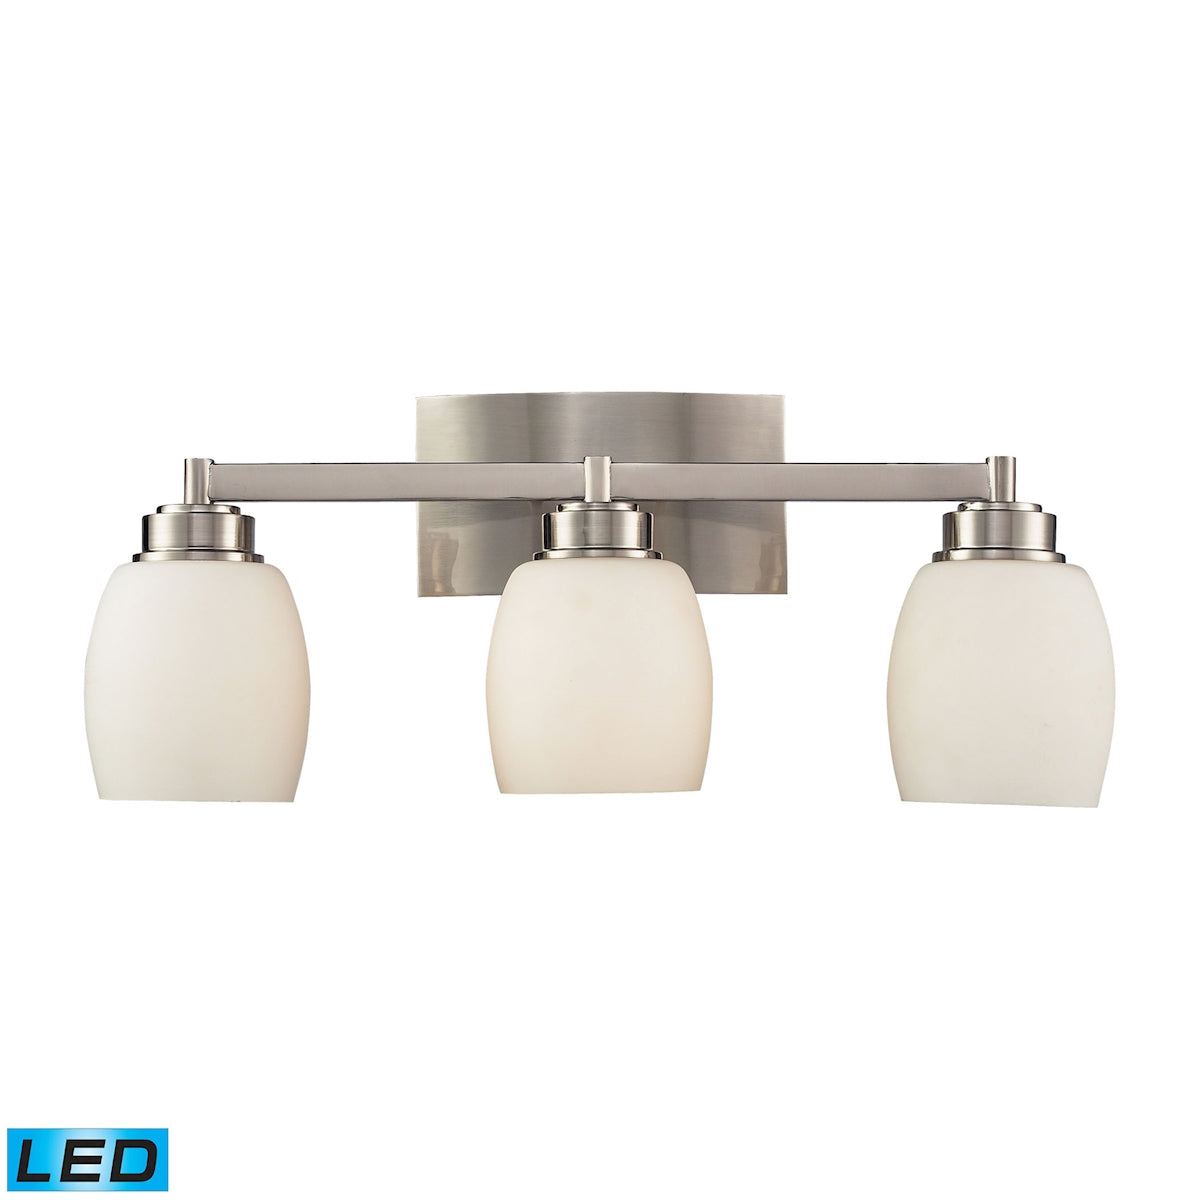 ELK Lighting 17102/3-LED Northport 3-Light Vanity Lamp in Satin Nickel with Opal Glass - Includes LED Bulbs